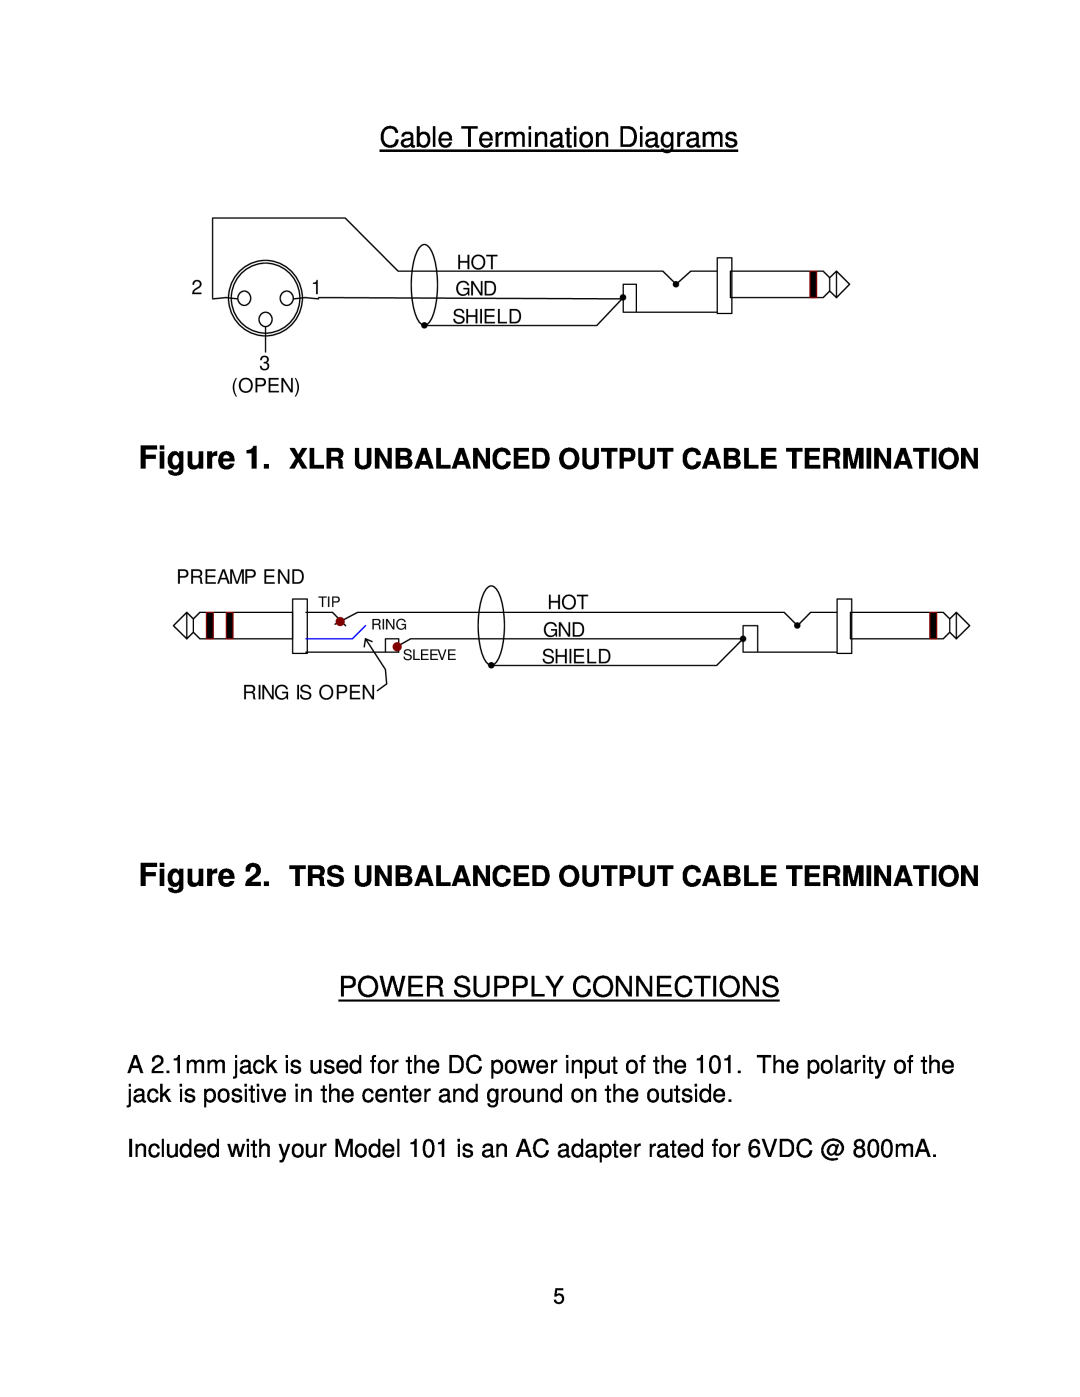 Boulder Amplifiers 101 Cable Termination Diagrams, Xlr Unbalanced Output Cable Termination, Power Supply Connections 